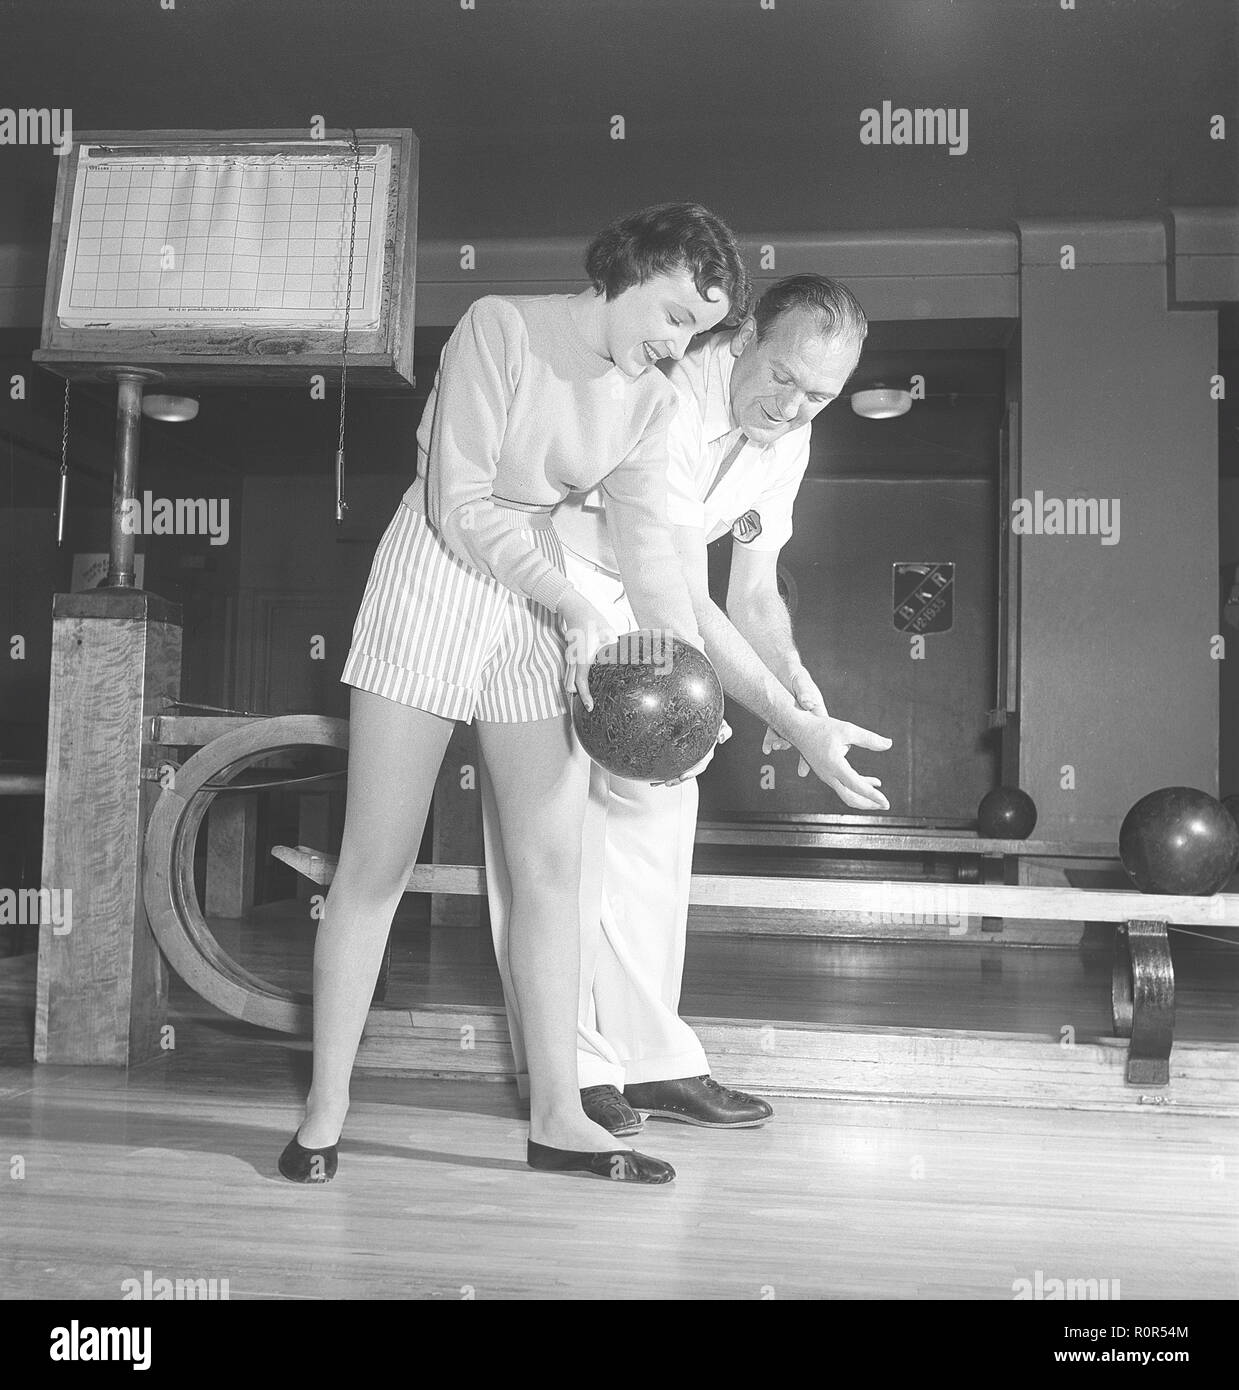 Bowling in the 1950s. A man with three young women in a bowling alley. They are dressed in short striped skirts and jumpers. The three girls are all theatre actresses; Ingrid Björk, UllaCarin Rydén and Brita Ulfberg. Ewert Ekström shows is instructing them in bowling. He was a professional bowler player in the 1930s and is at this time an instructor and owner of the bowling club.  1950. Sweden Photo Kristoffersson ref AY36-12 Stock Photo